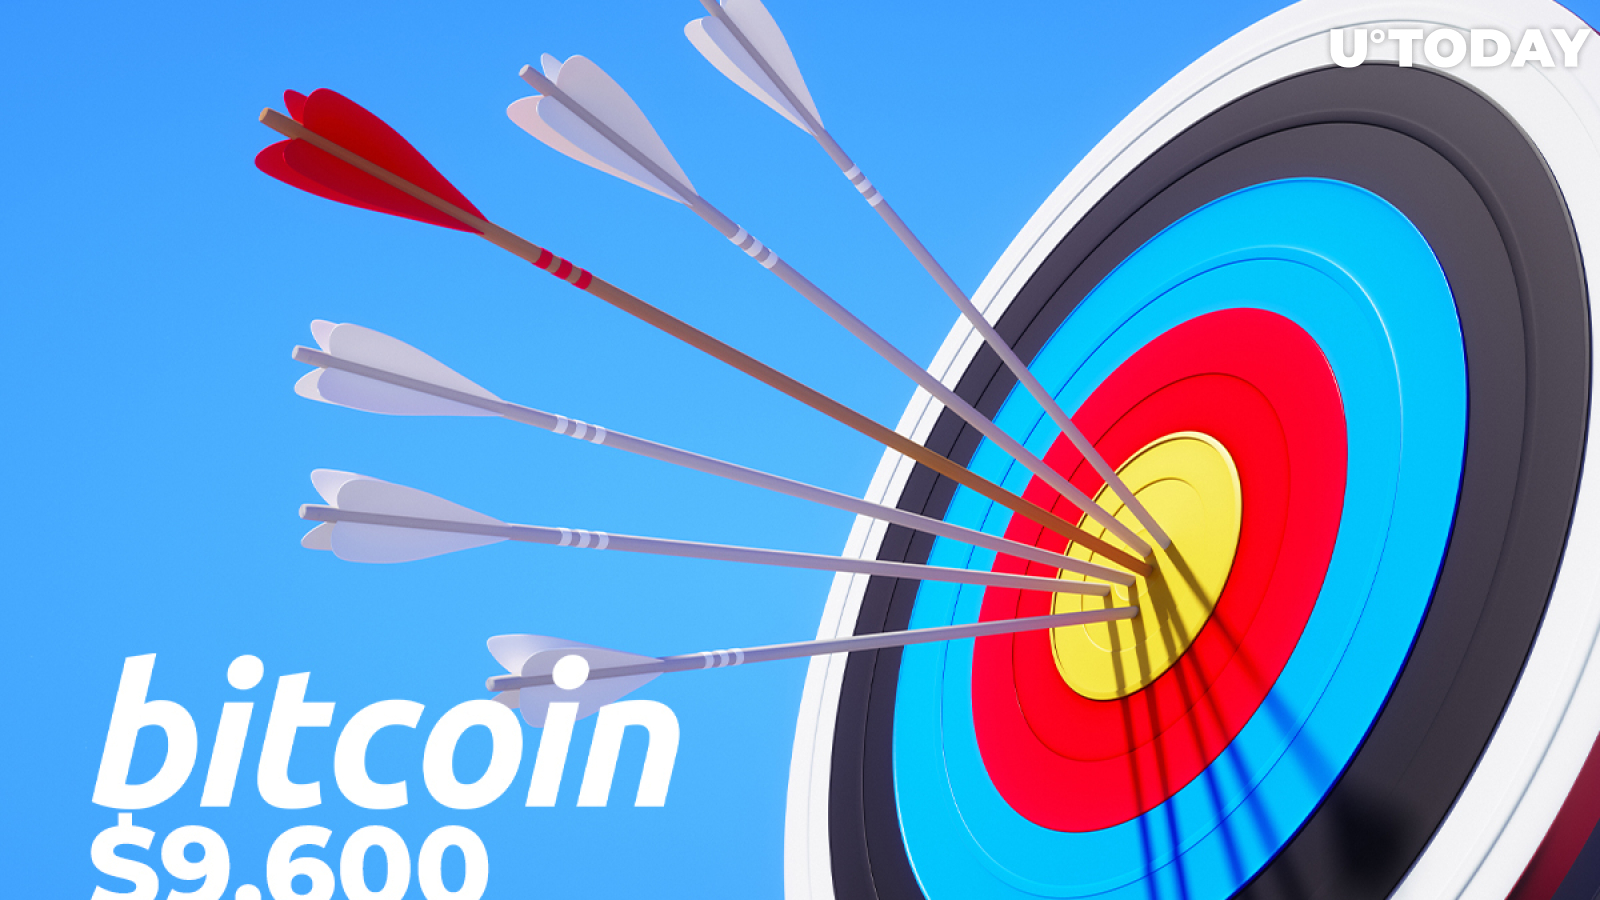 Bitcoin Price May Hit $9,600 as Soon as It Overcomes This Level: Major Analyst